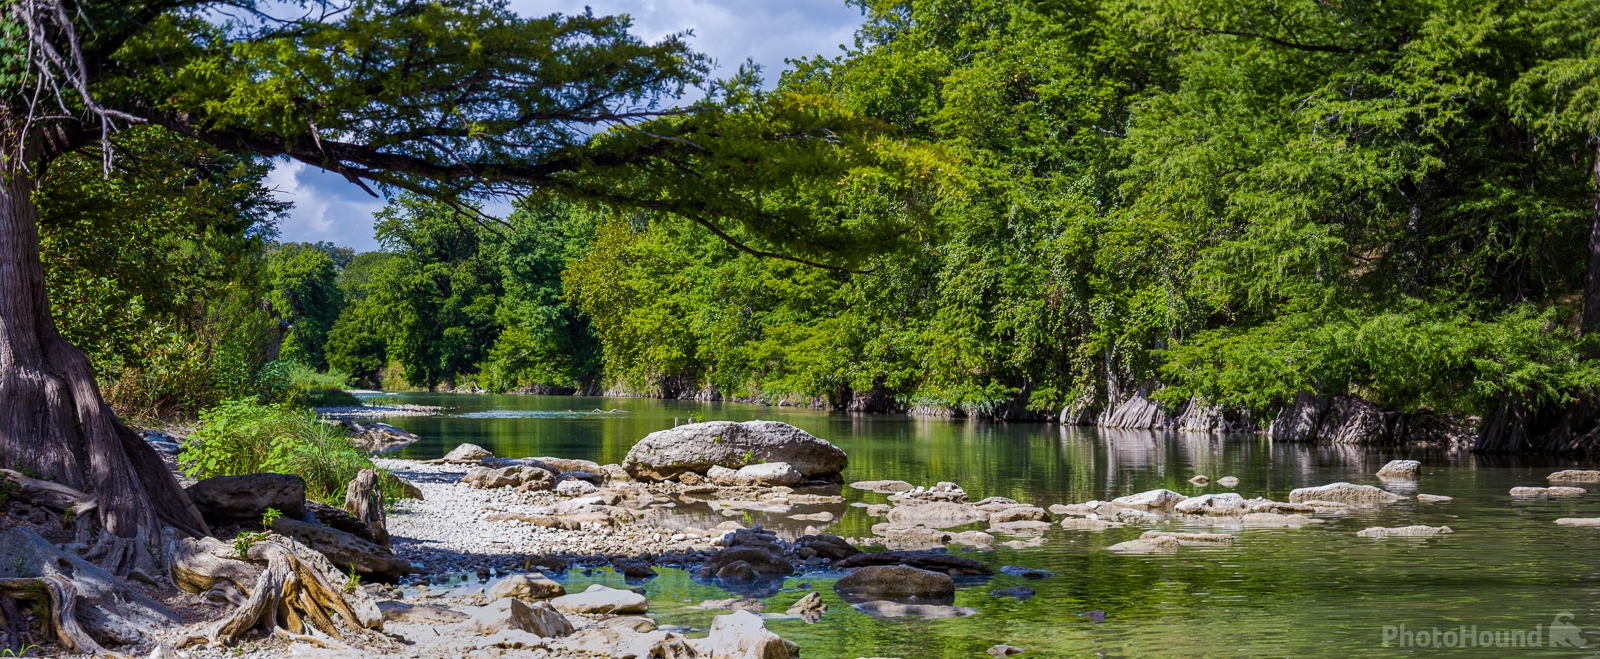 Image of Guadalupe State Park - Along the River by Jim Spickard